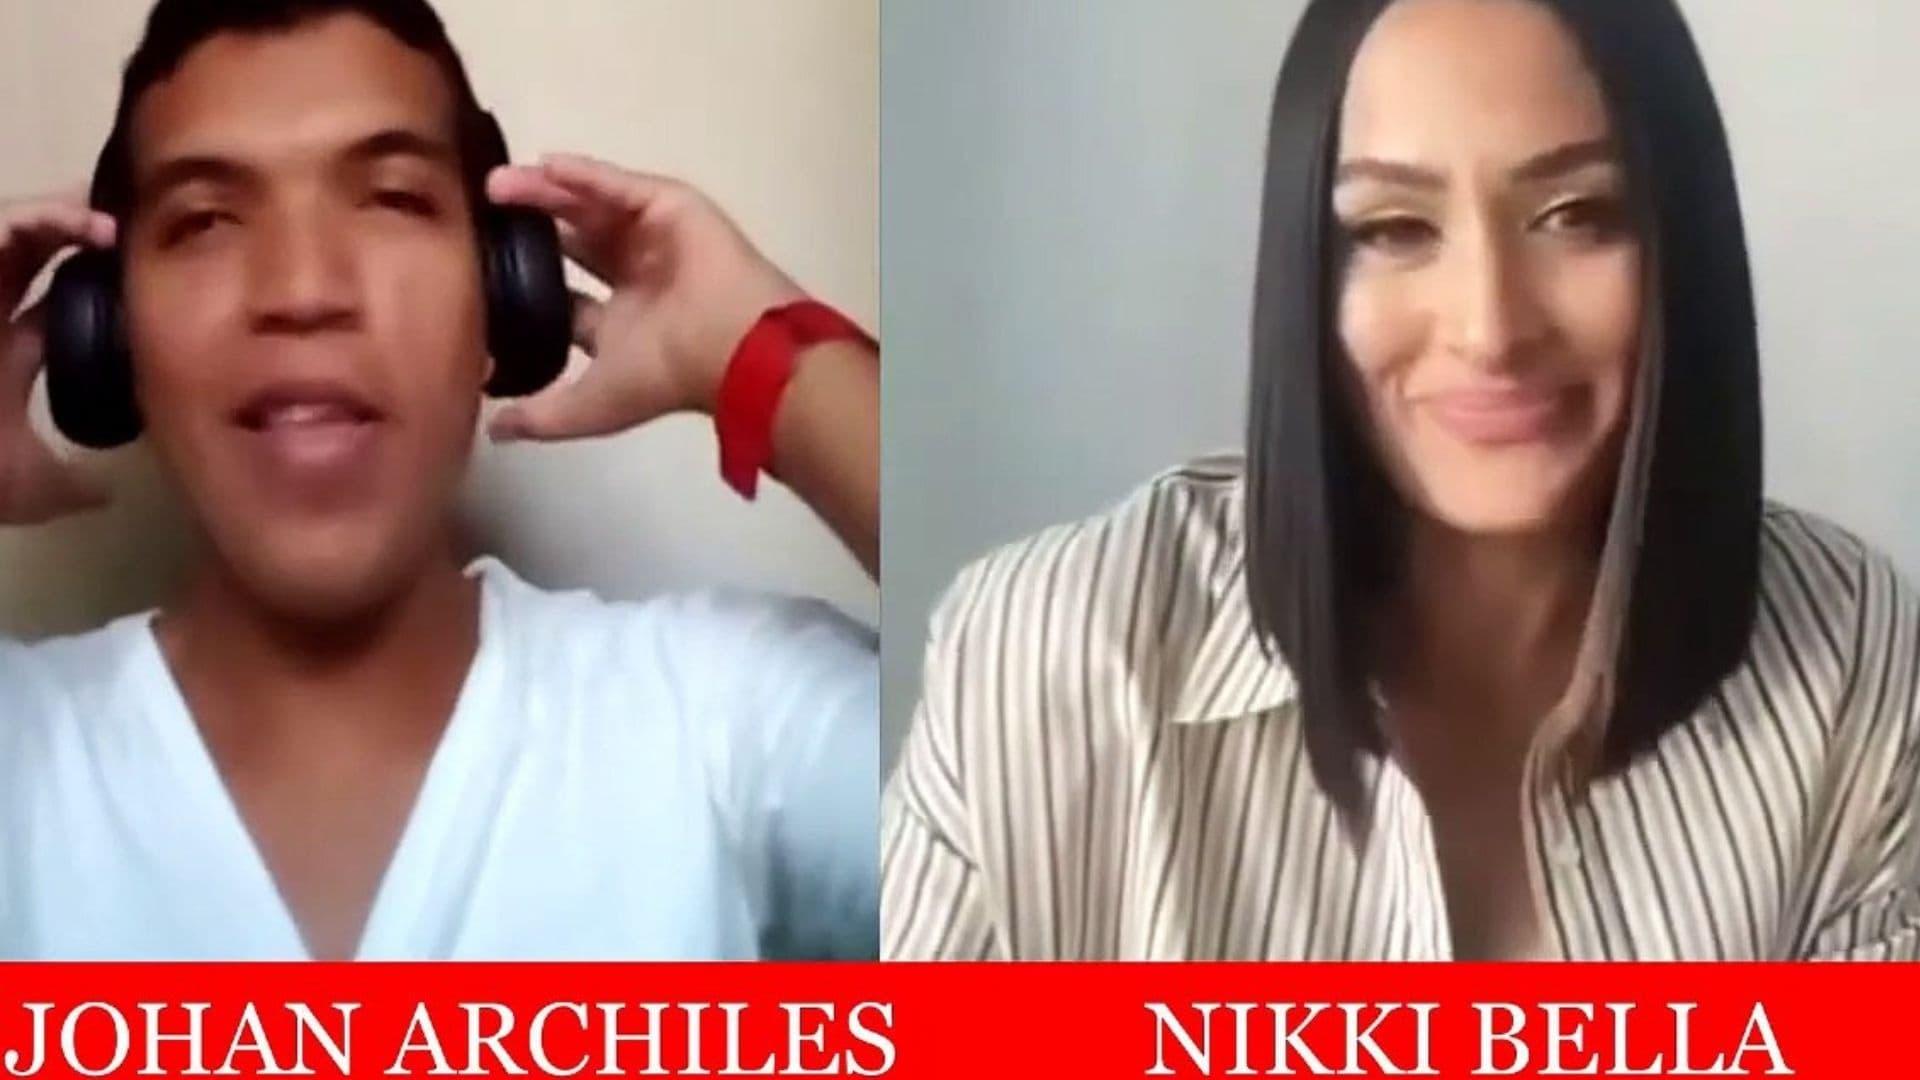 Interview To Nikki Bella By Johan Archiles backdrop